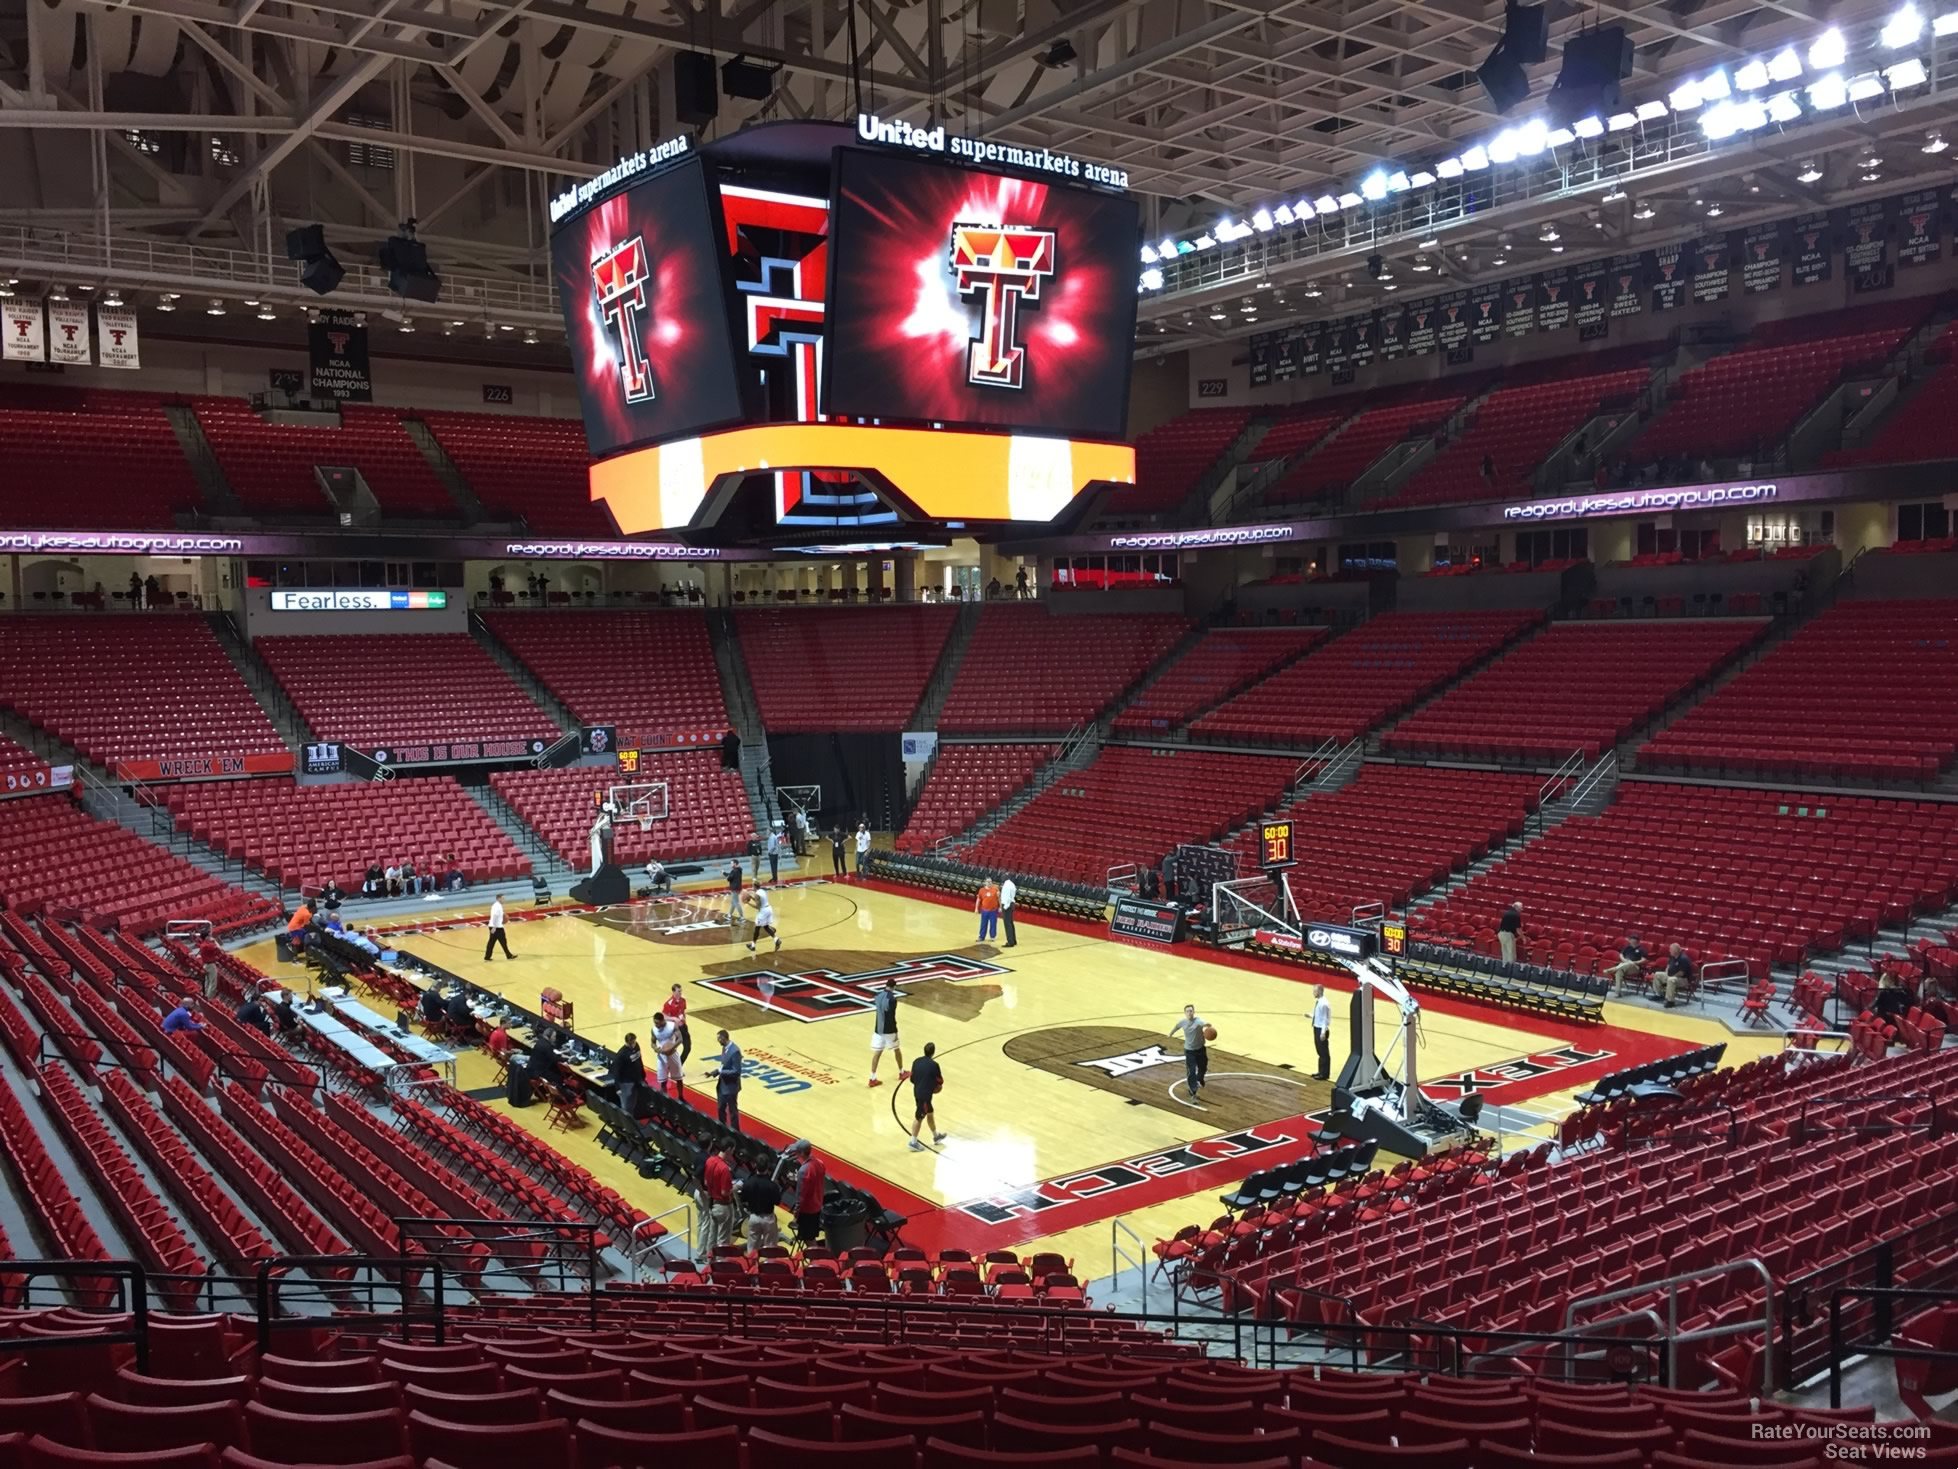 section 109, row 25 seat view  - united supermarkets arena